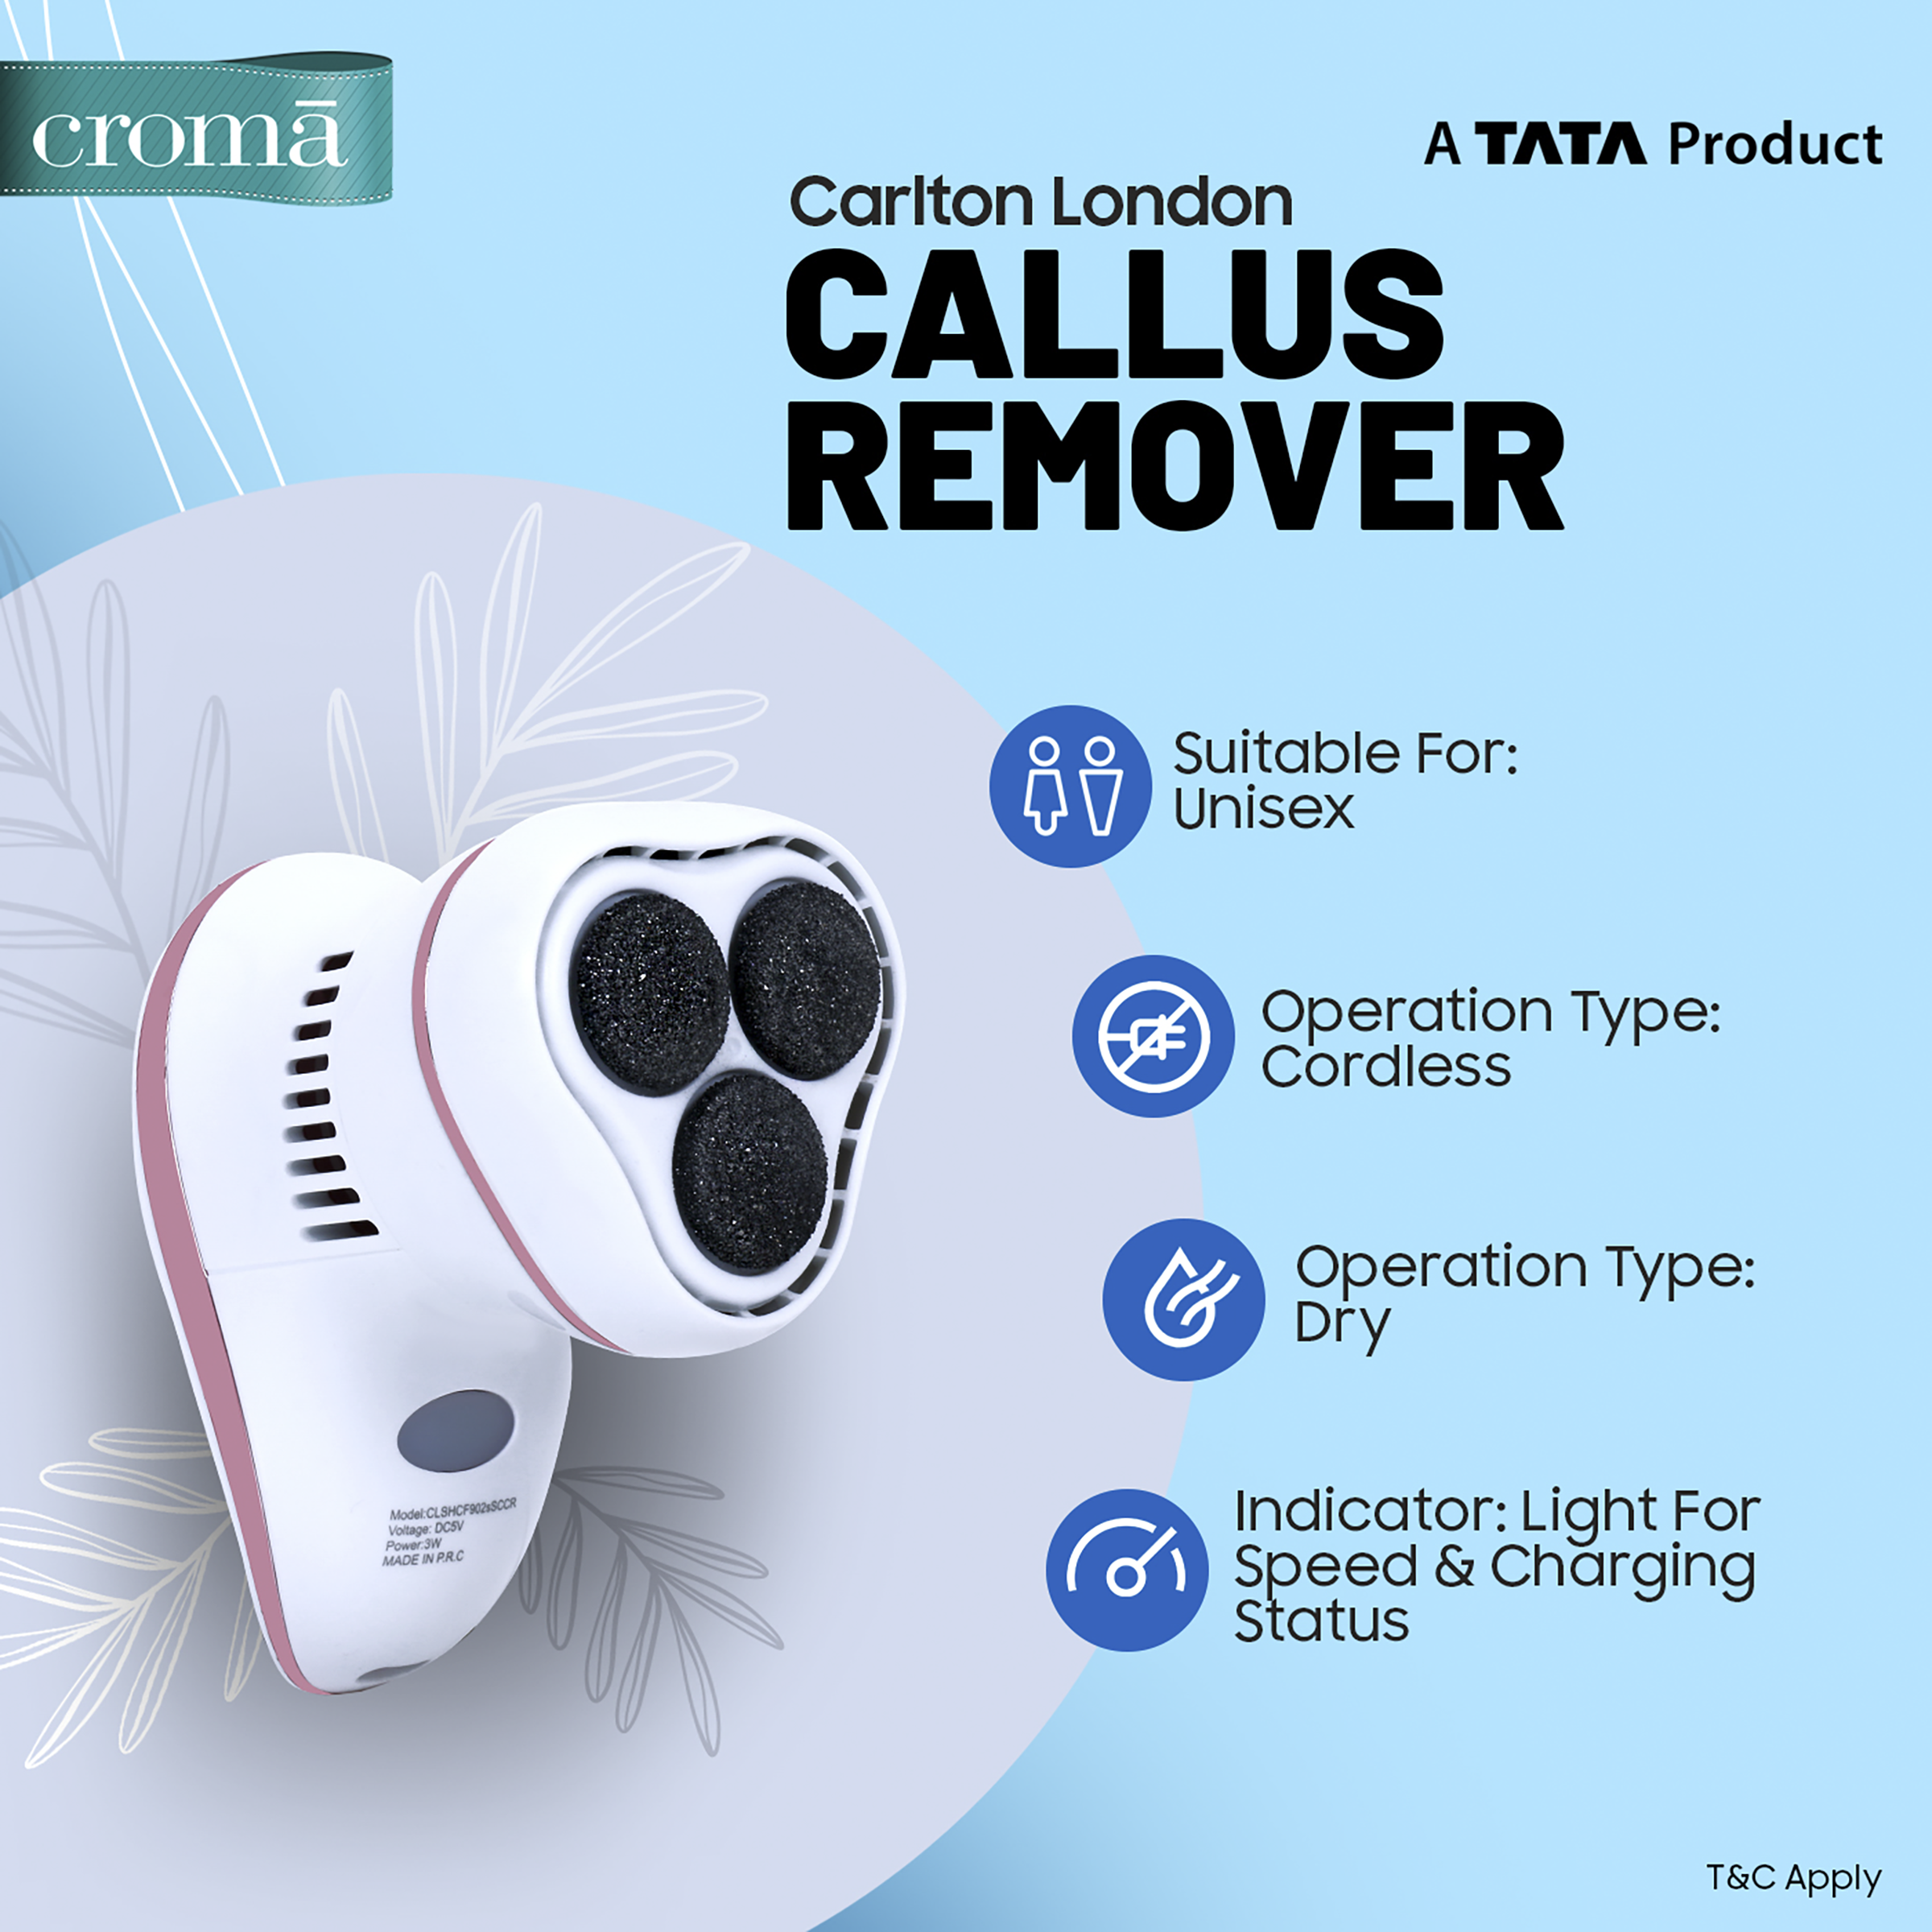 Carlton London Callus Remover (2 Replaceable Heads, CLSHCF902sSCCR, White/Pink)_2